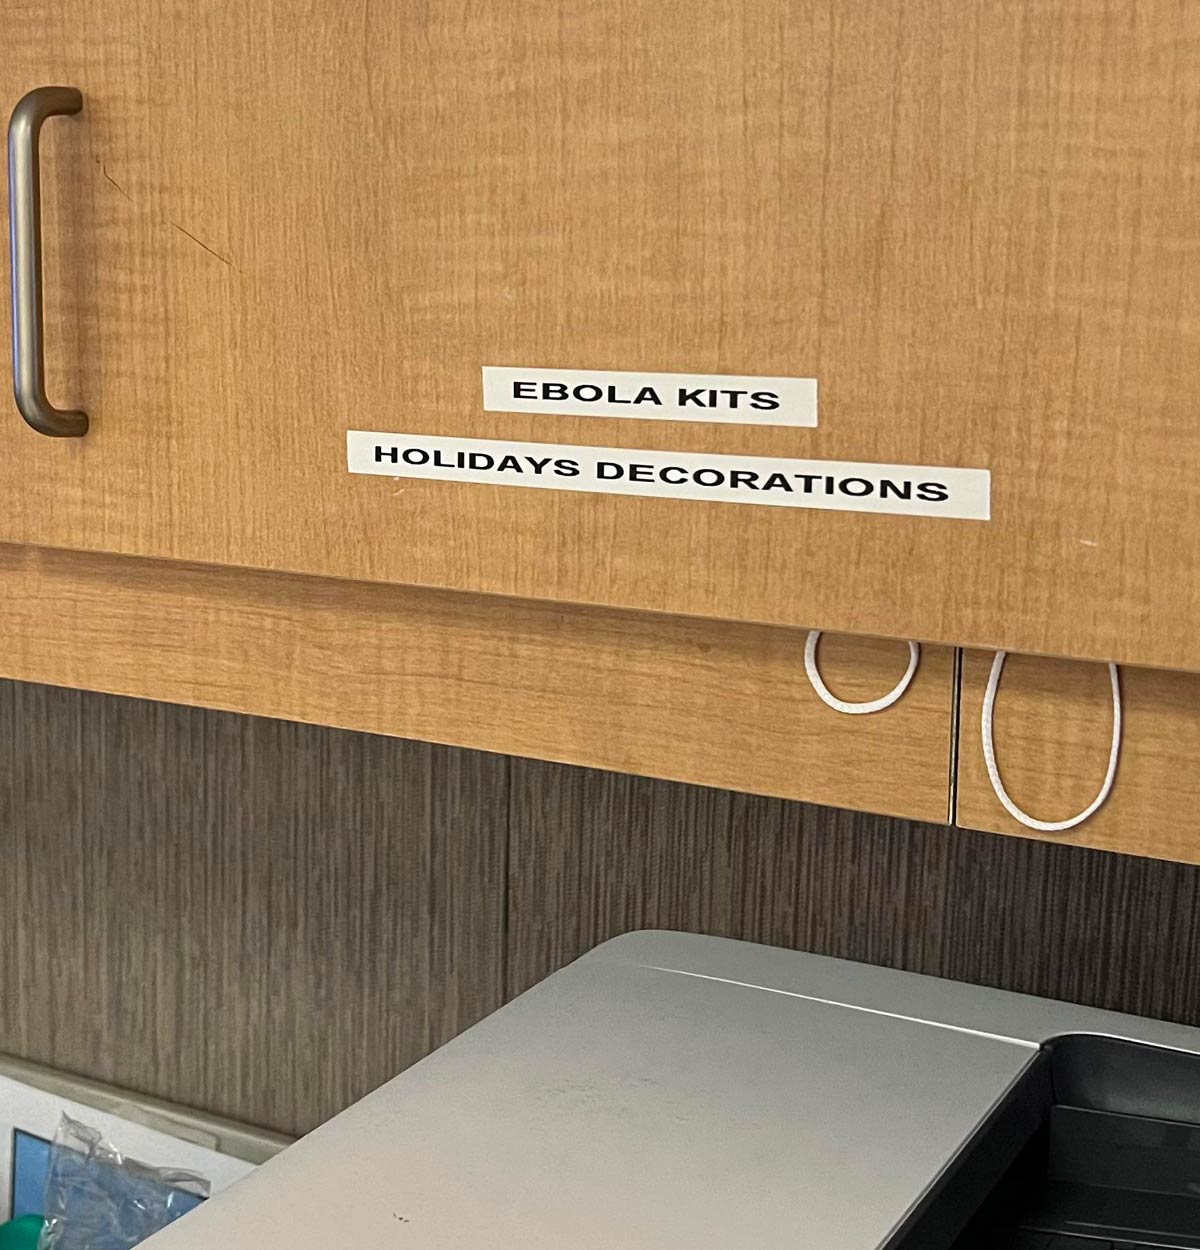 Storage cabinet at my local hospital